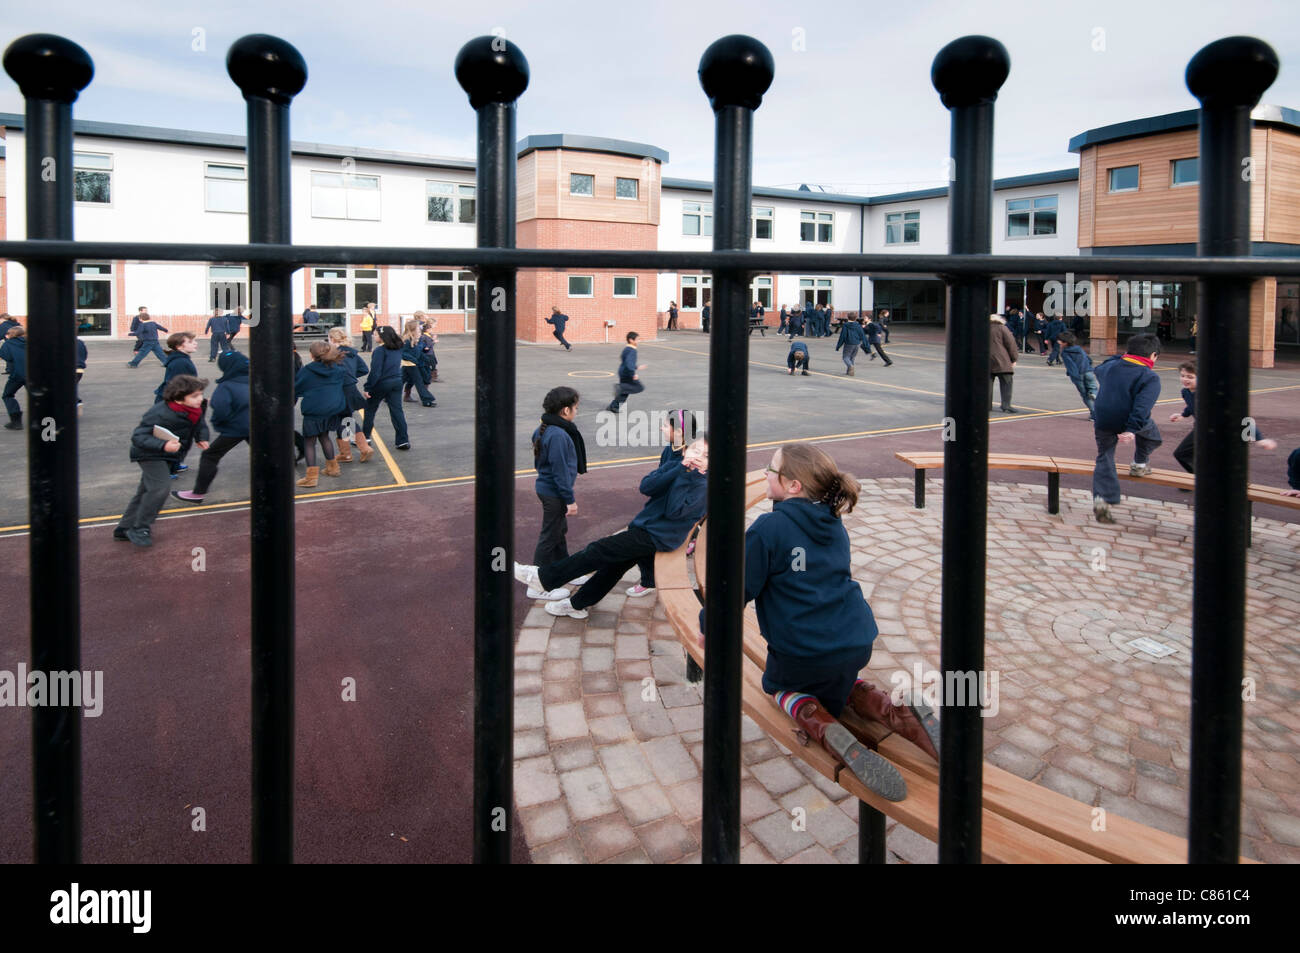 Playtime at an inner city school Stock Photo